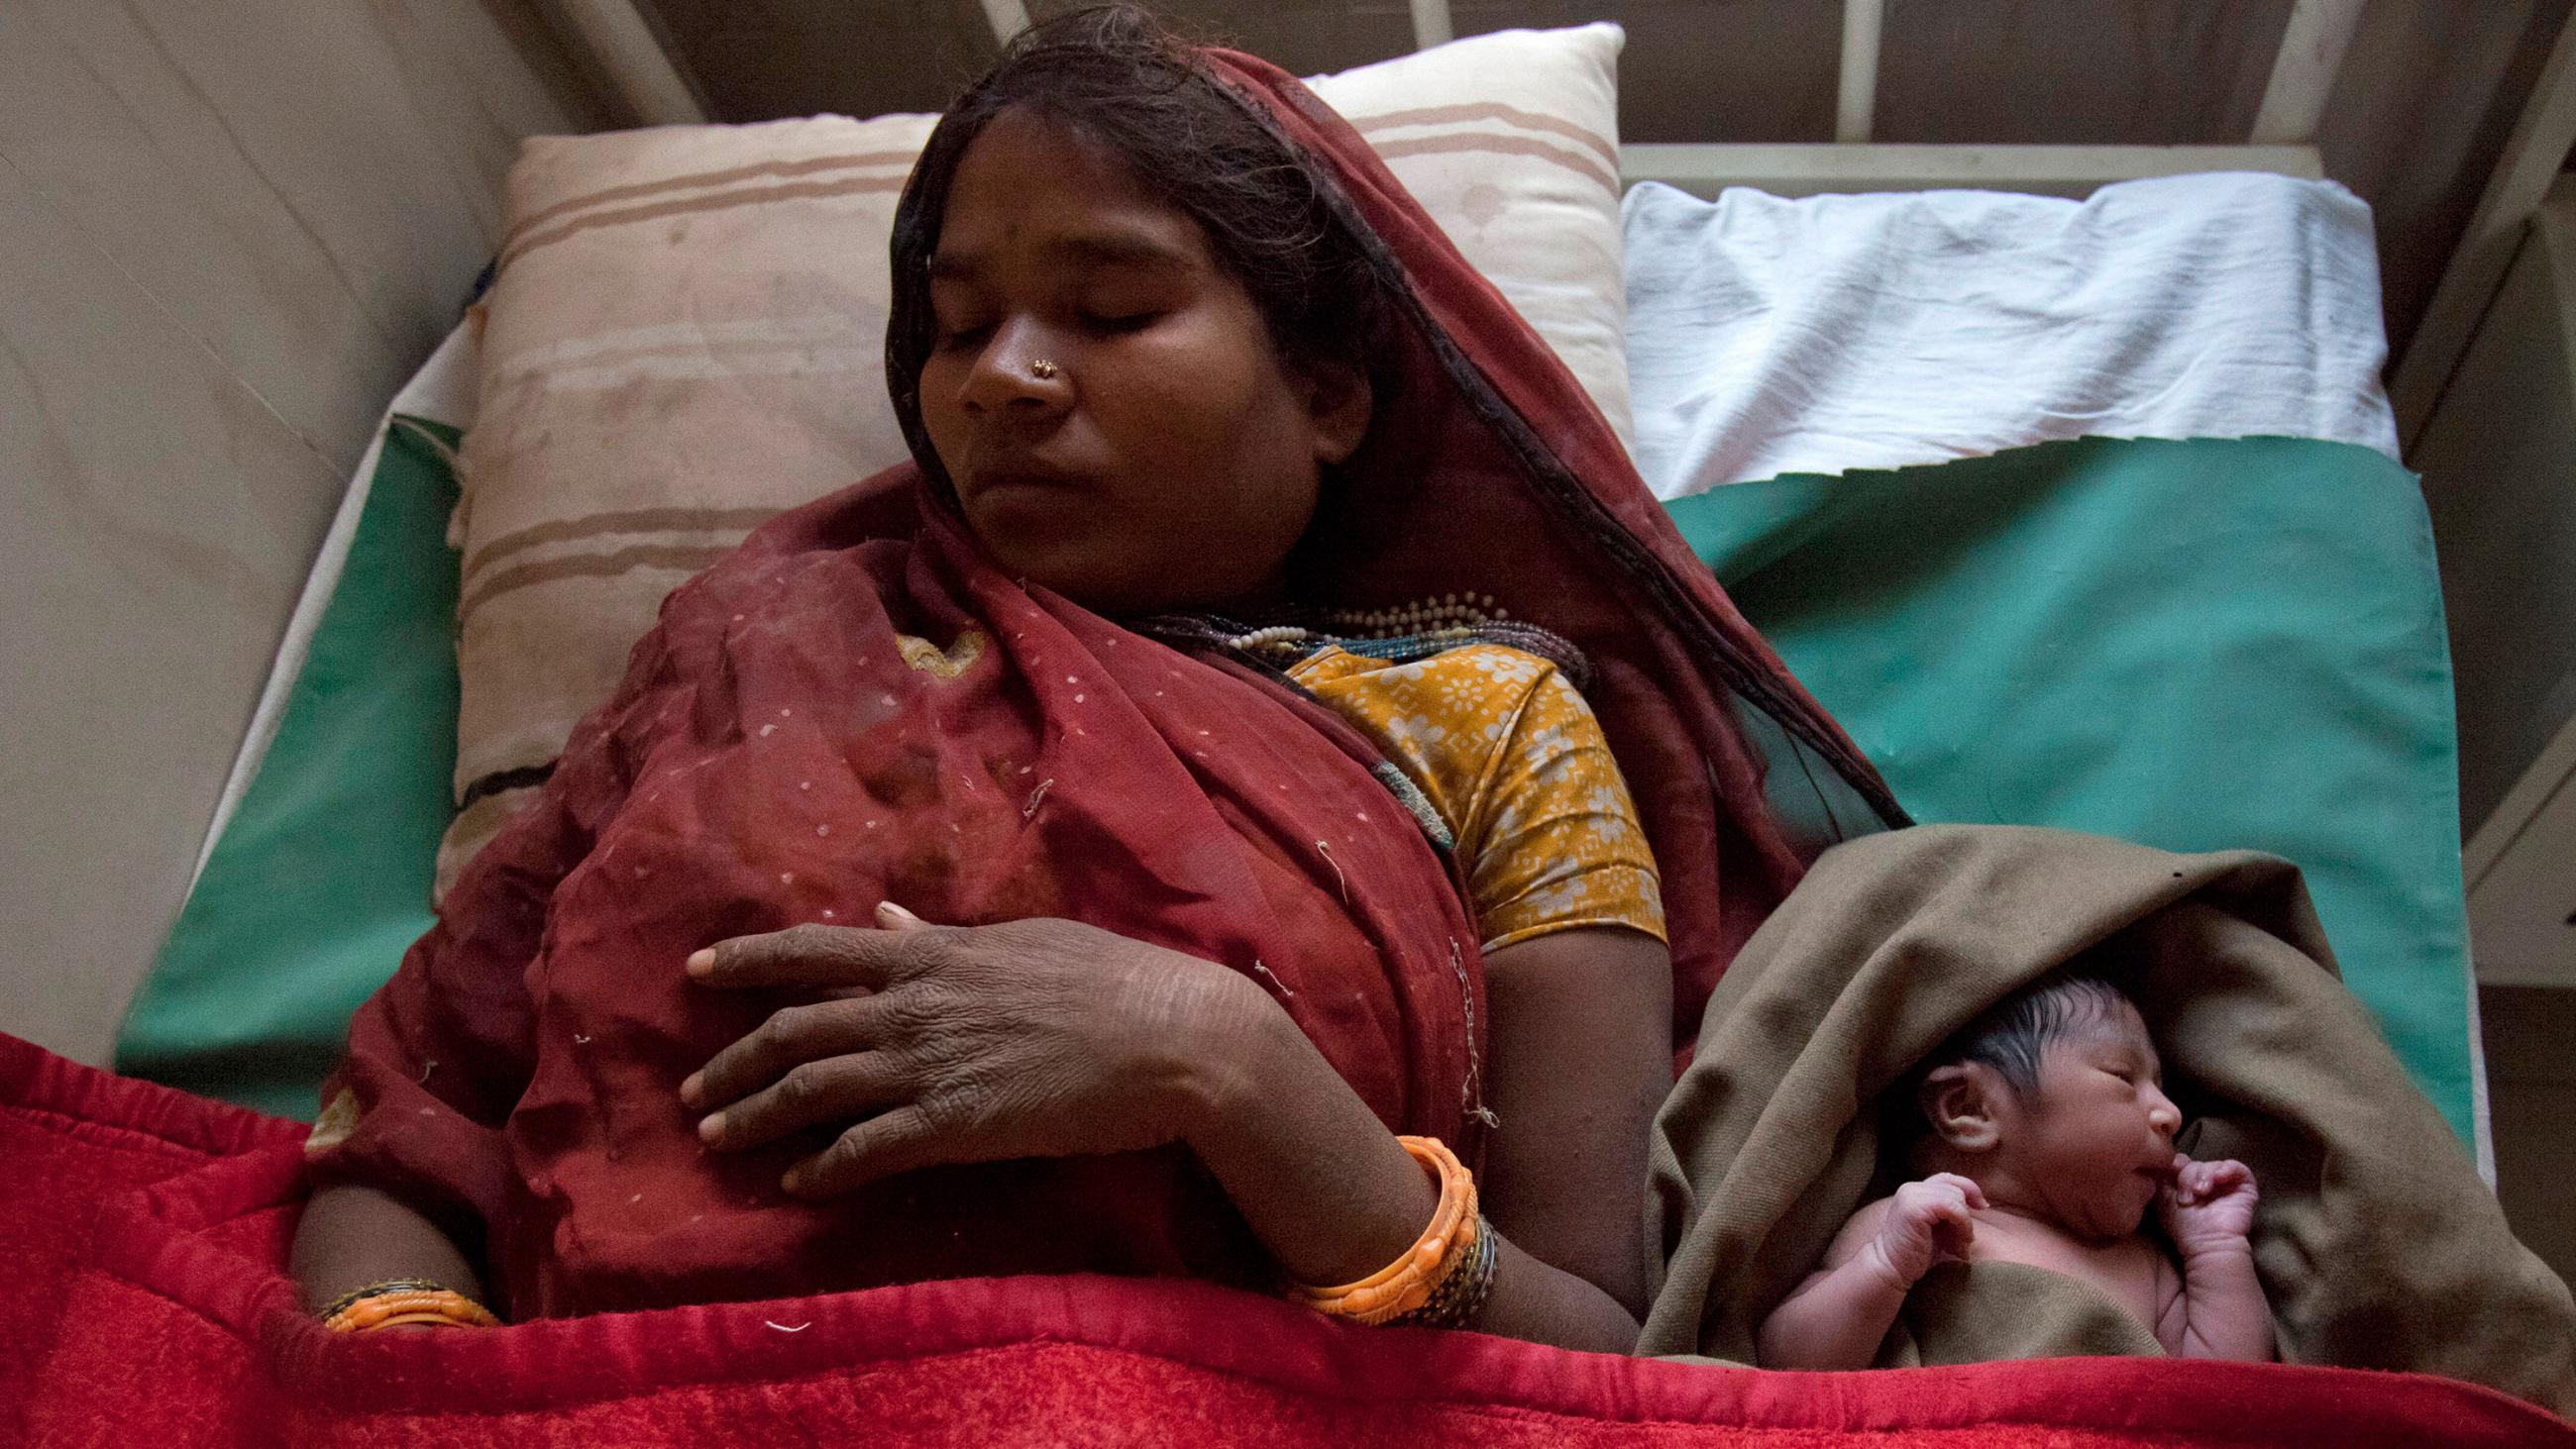 The photo shows mother and child both resting on a bed with a red blanket and a green sheet. 